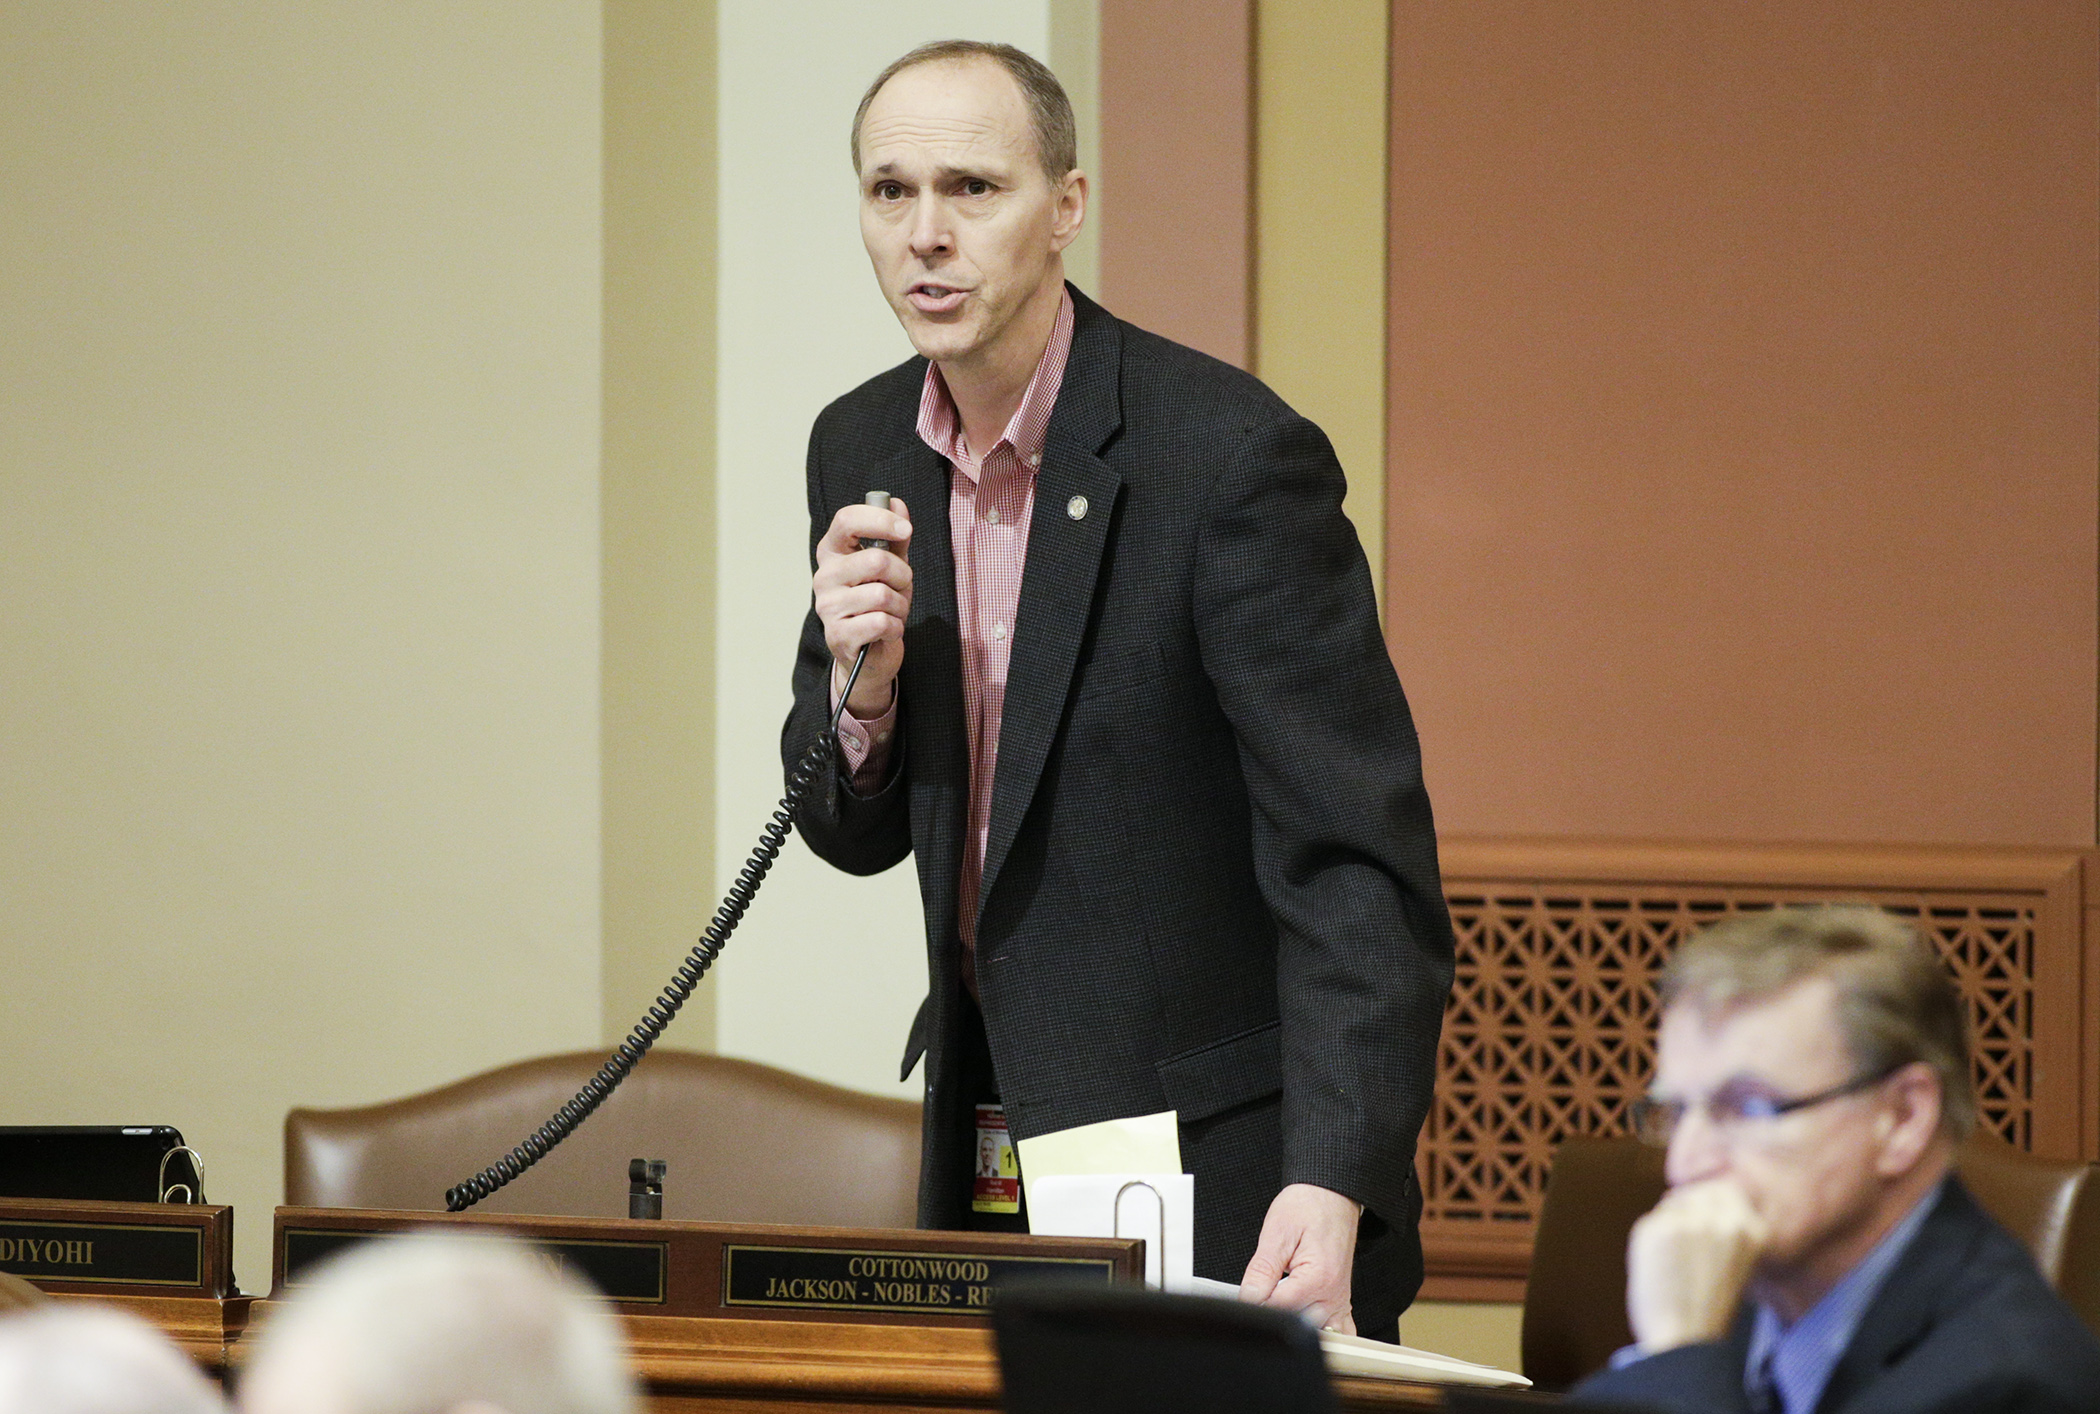 Rep. Rod Hamilton, chair of the House Agriculture Finance Committee, discusses provisions of the omnibus agriculture finance bill during House Floor debate April 5. The bill passed 134-0. Photo by Paul Battaglia